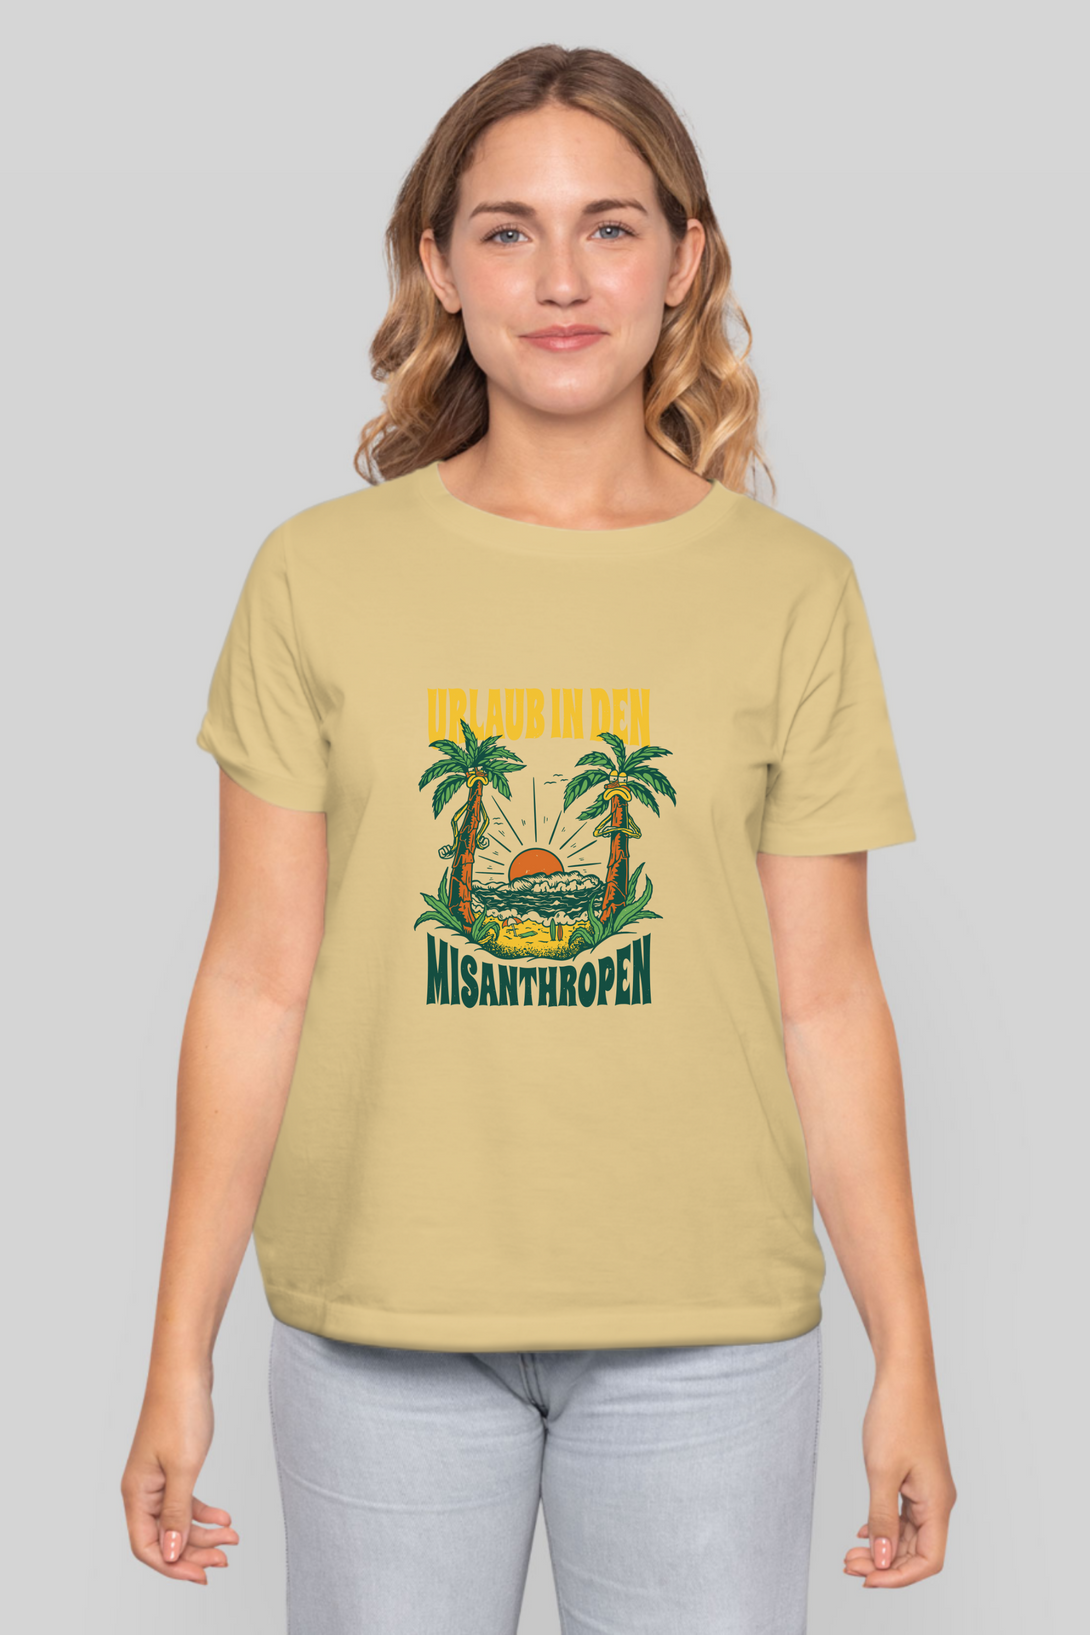 Vacation Away From People Printed T-Shirt For Women - WowWaves - 8